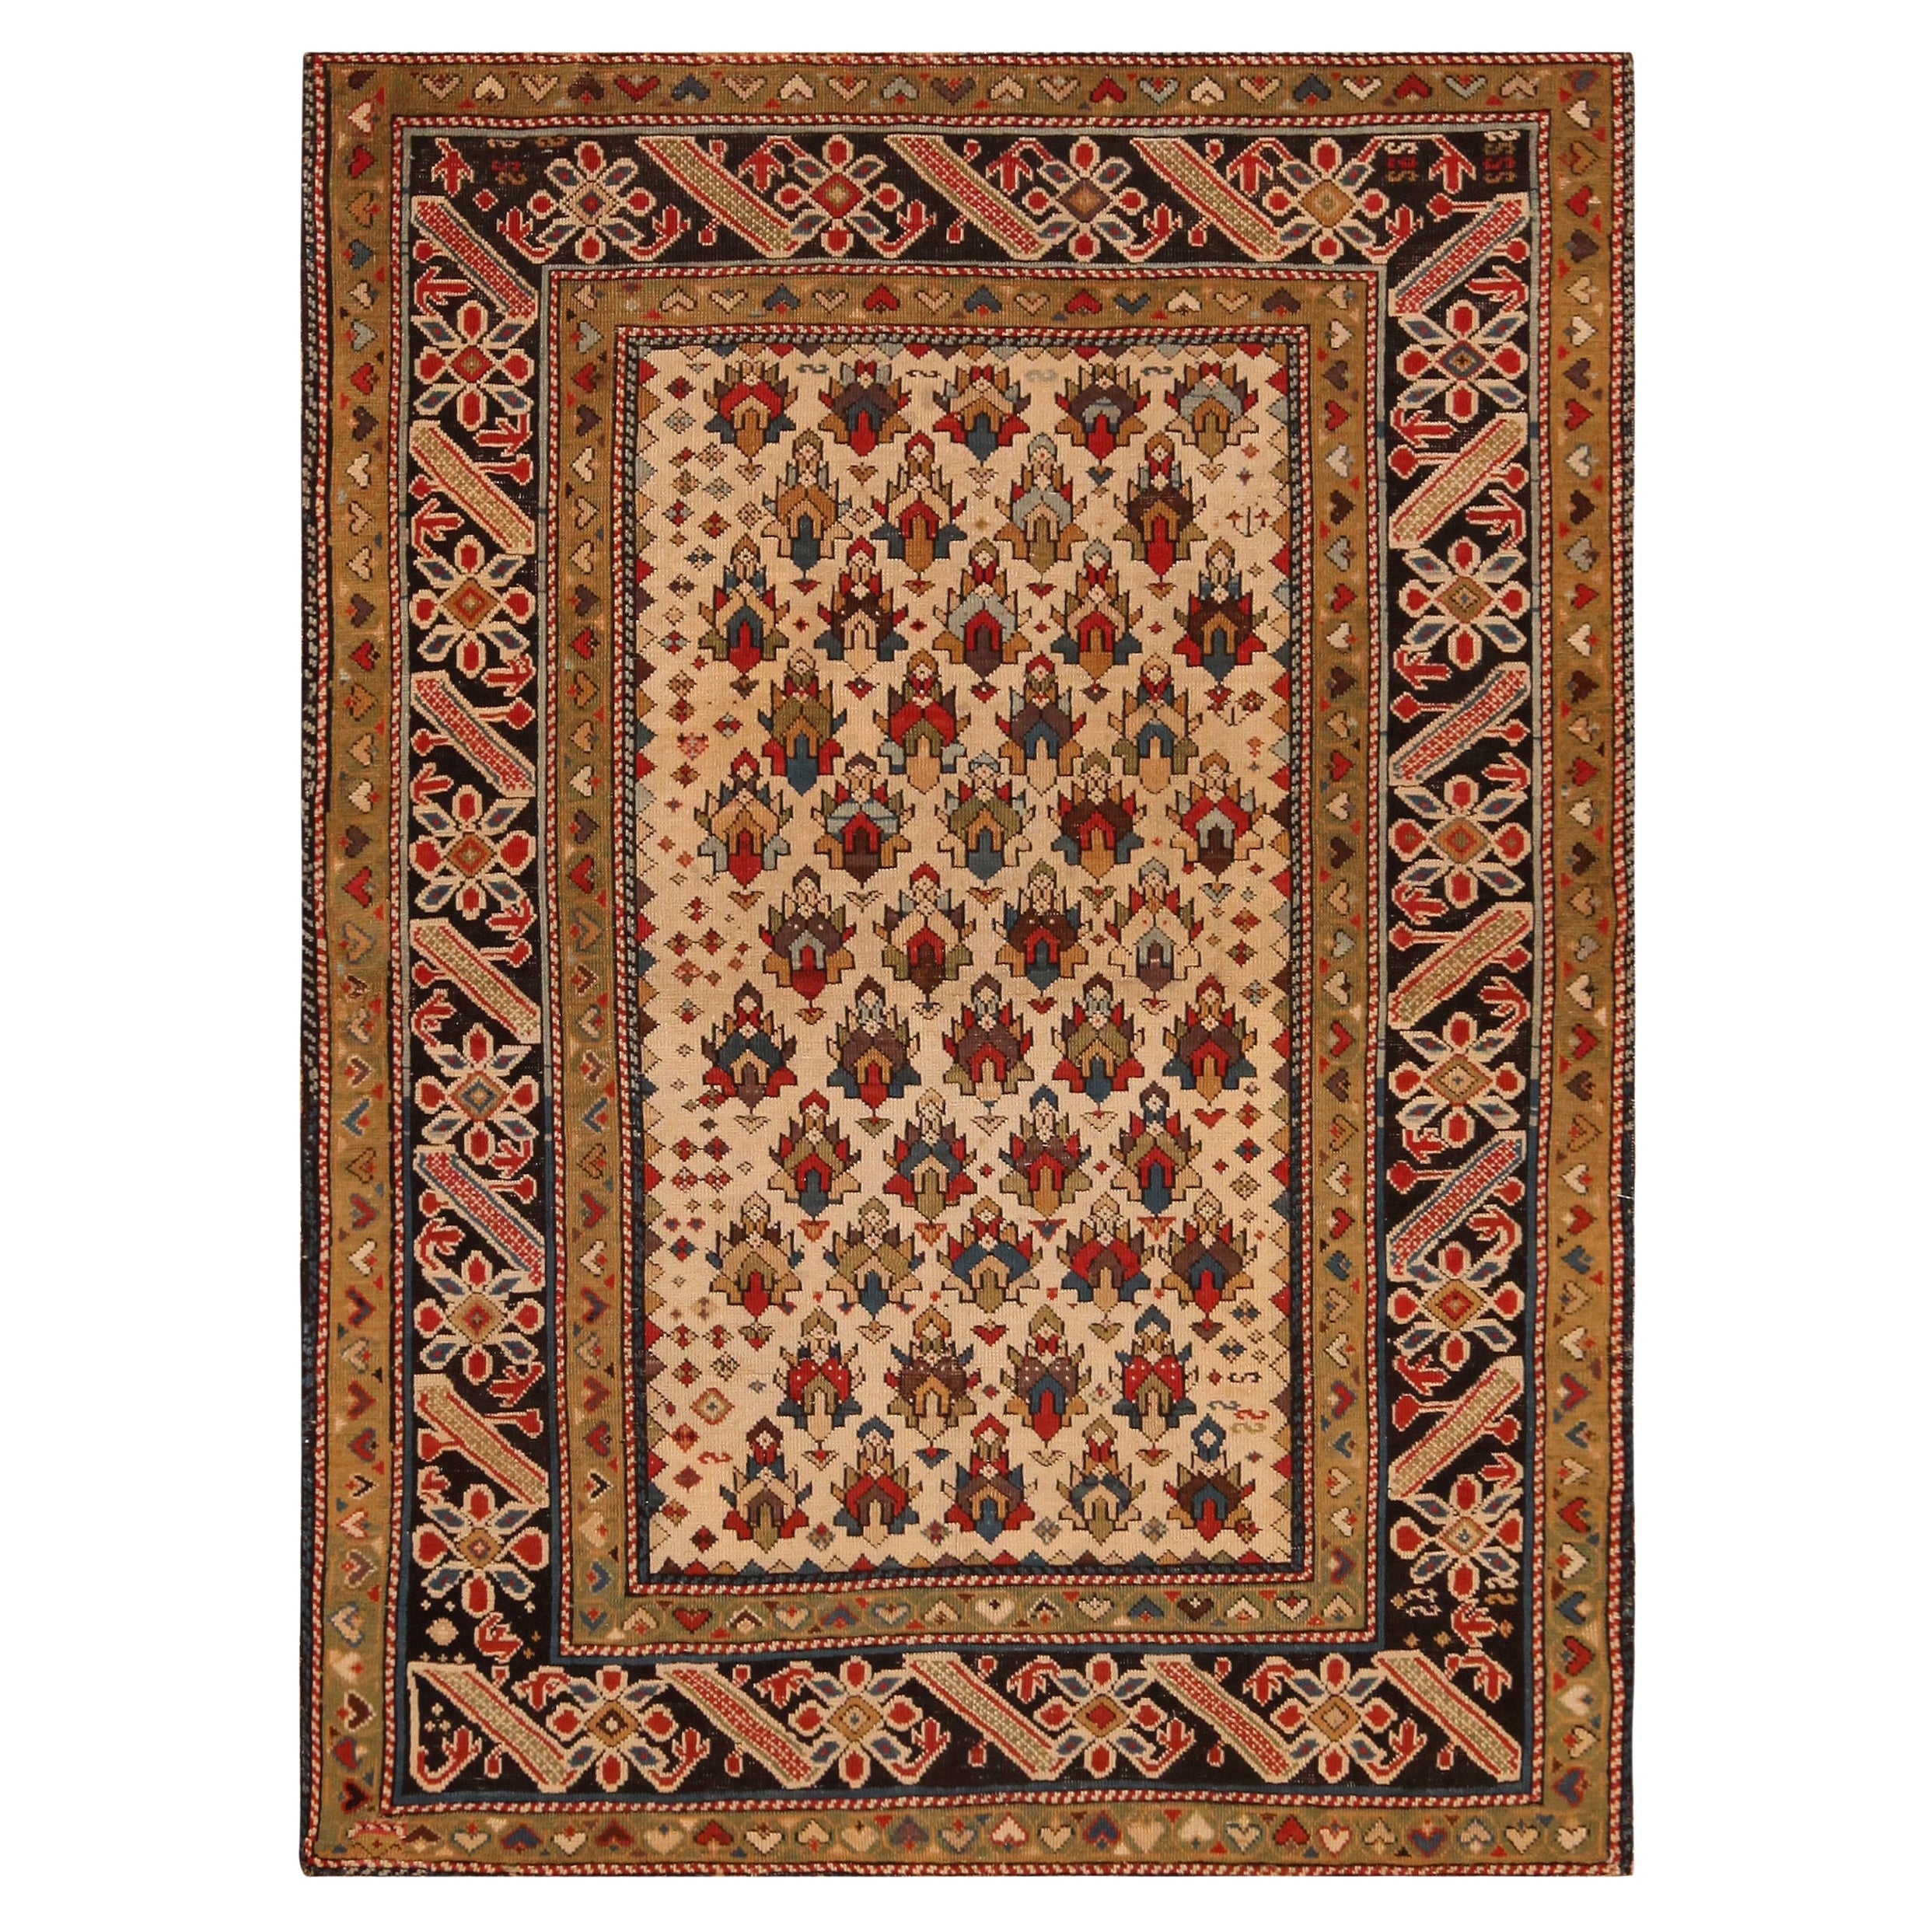 Nazmiyal Collection Antique Caucasian Chichi Rug. Size: 3 ft 10 in x 5 ft 